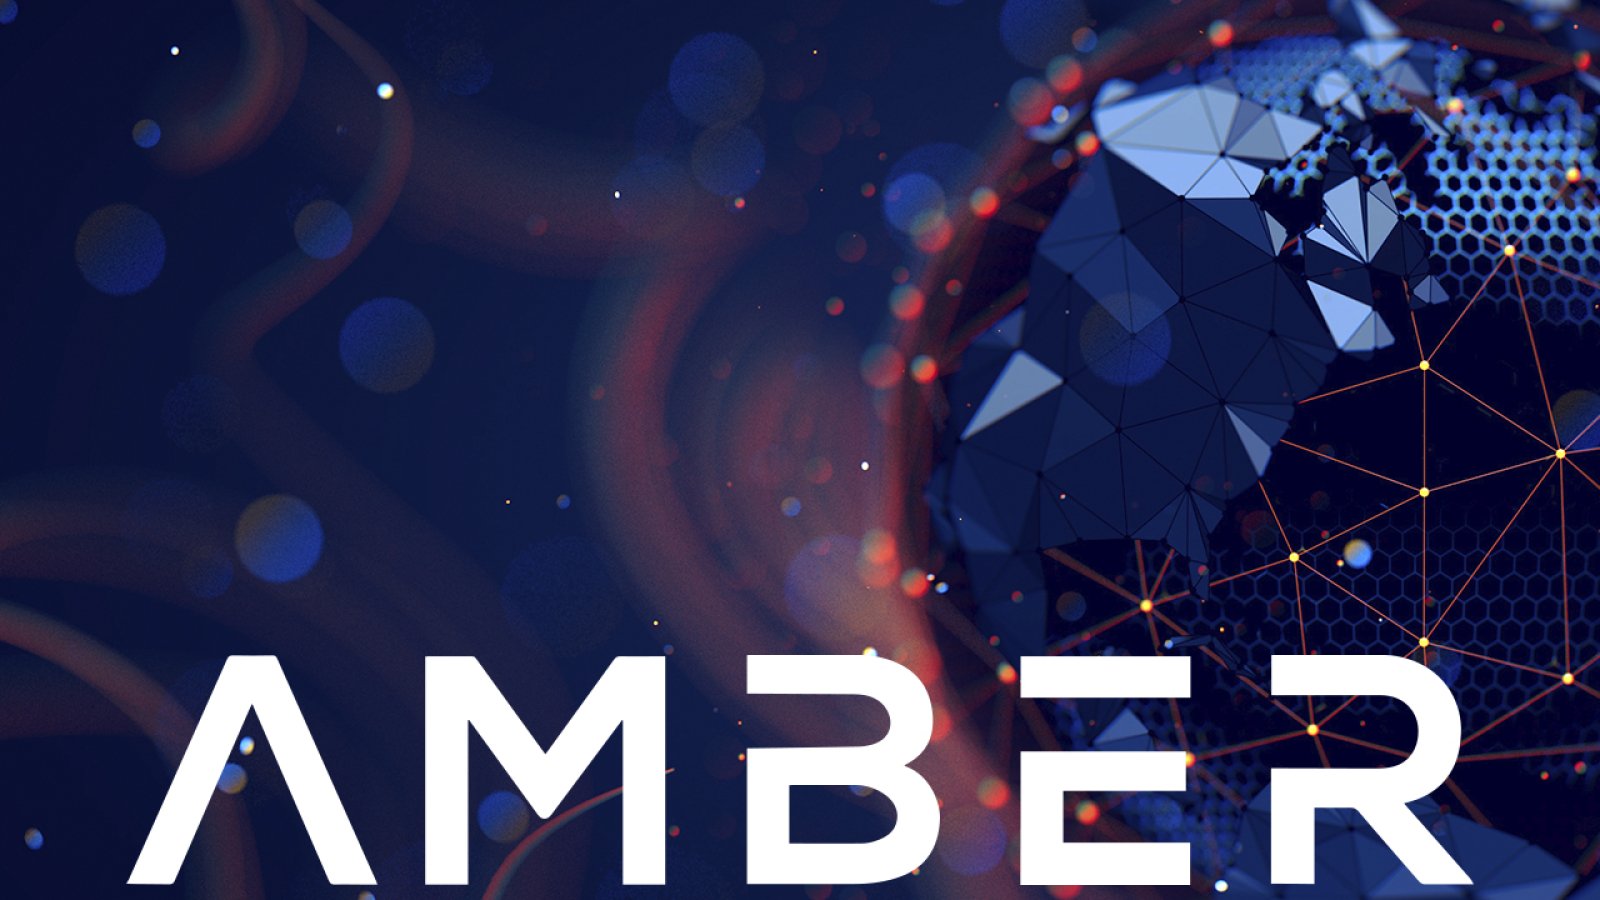 Amber Group Expands Into Metaverses, Announces Openverse Infrastructure Platform Release